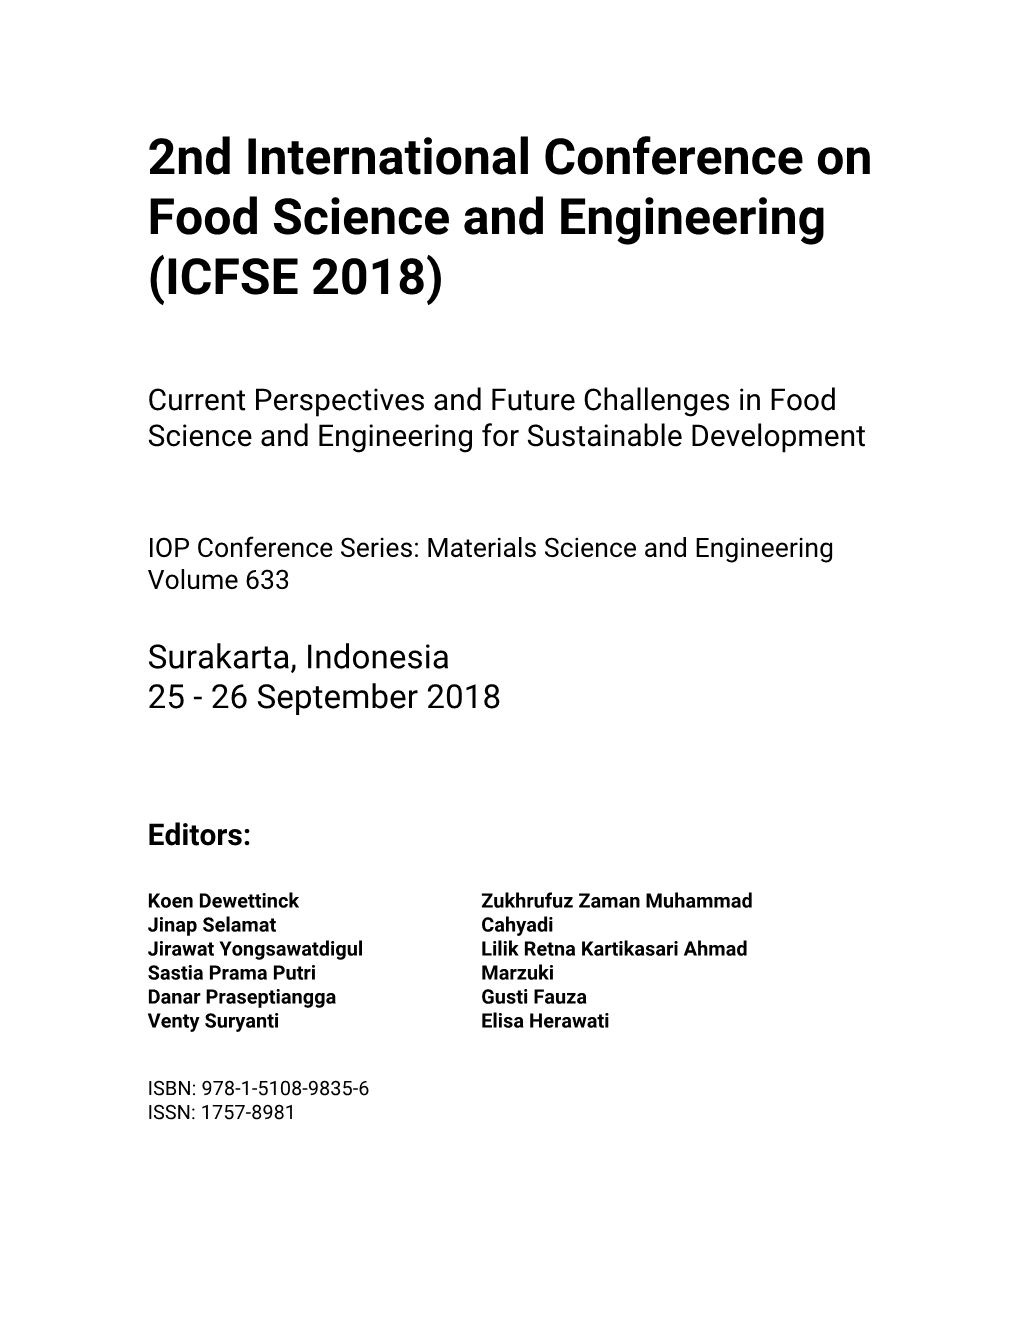 2Nd International Conference on Food Science and Engineering (ICFSE 2018)